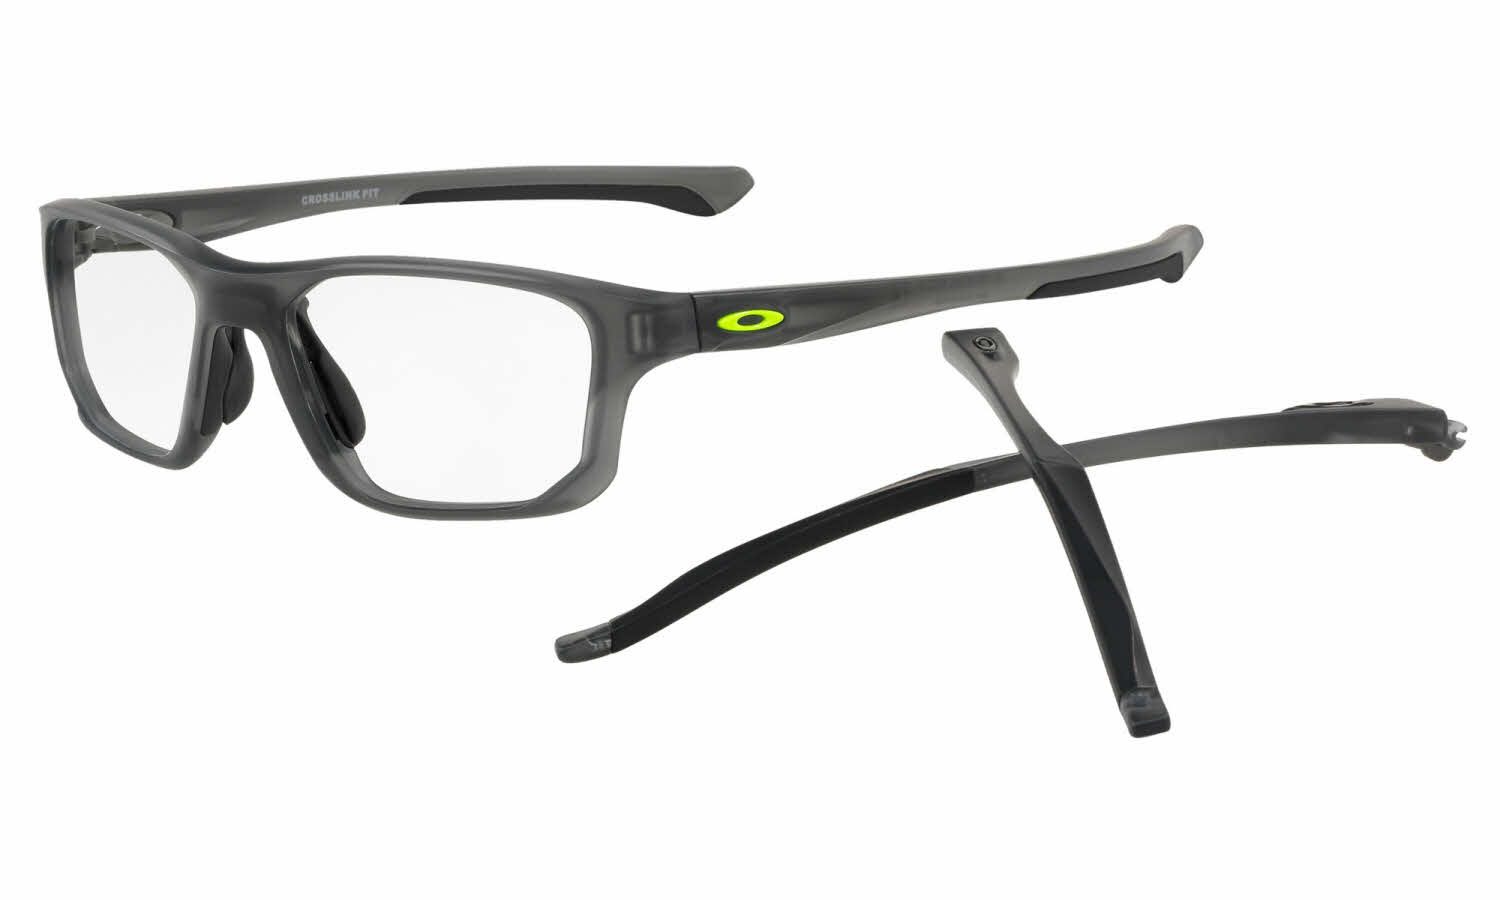 oakley glasses changeable arms